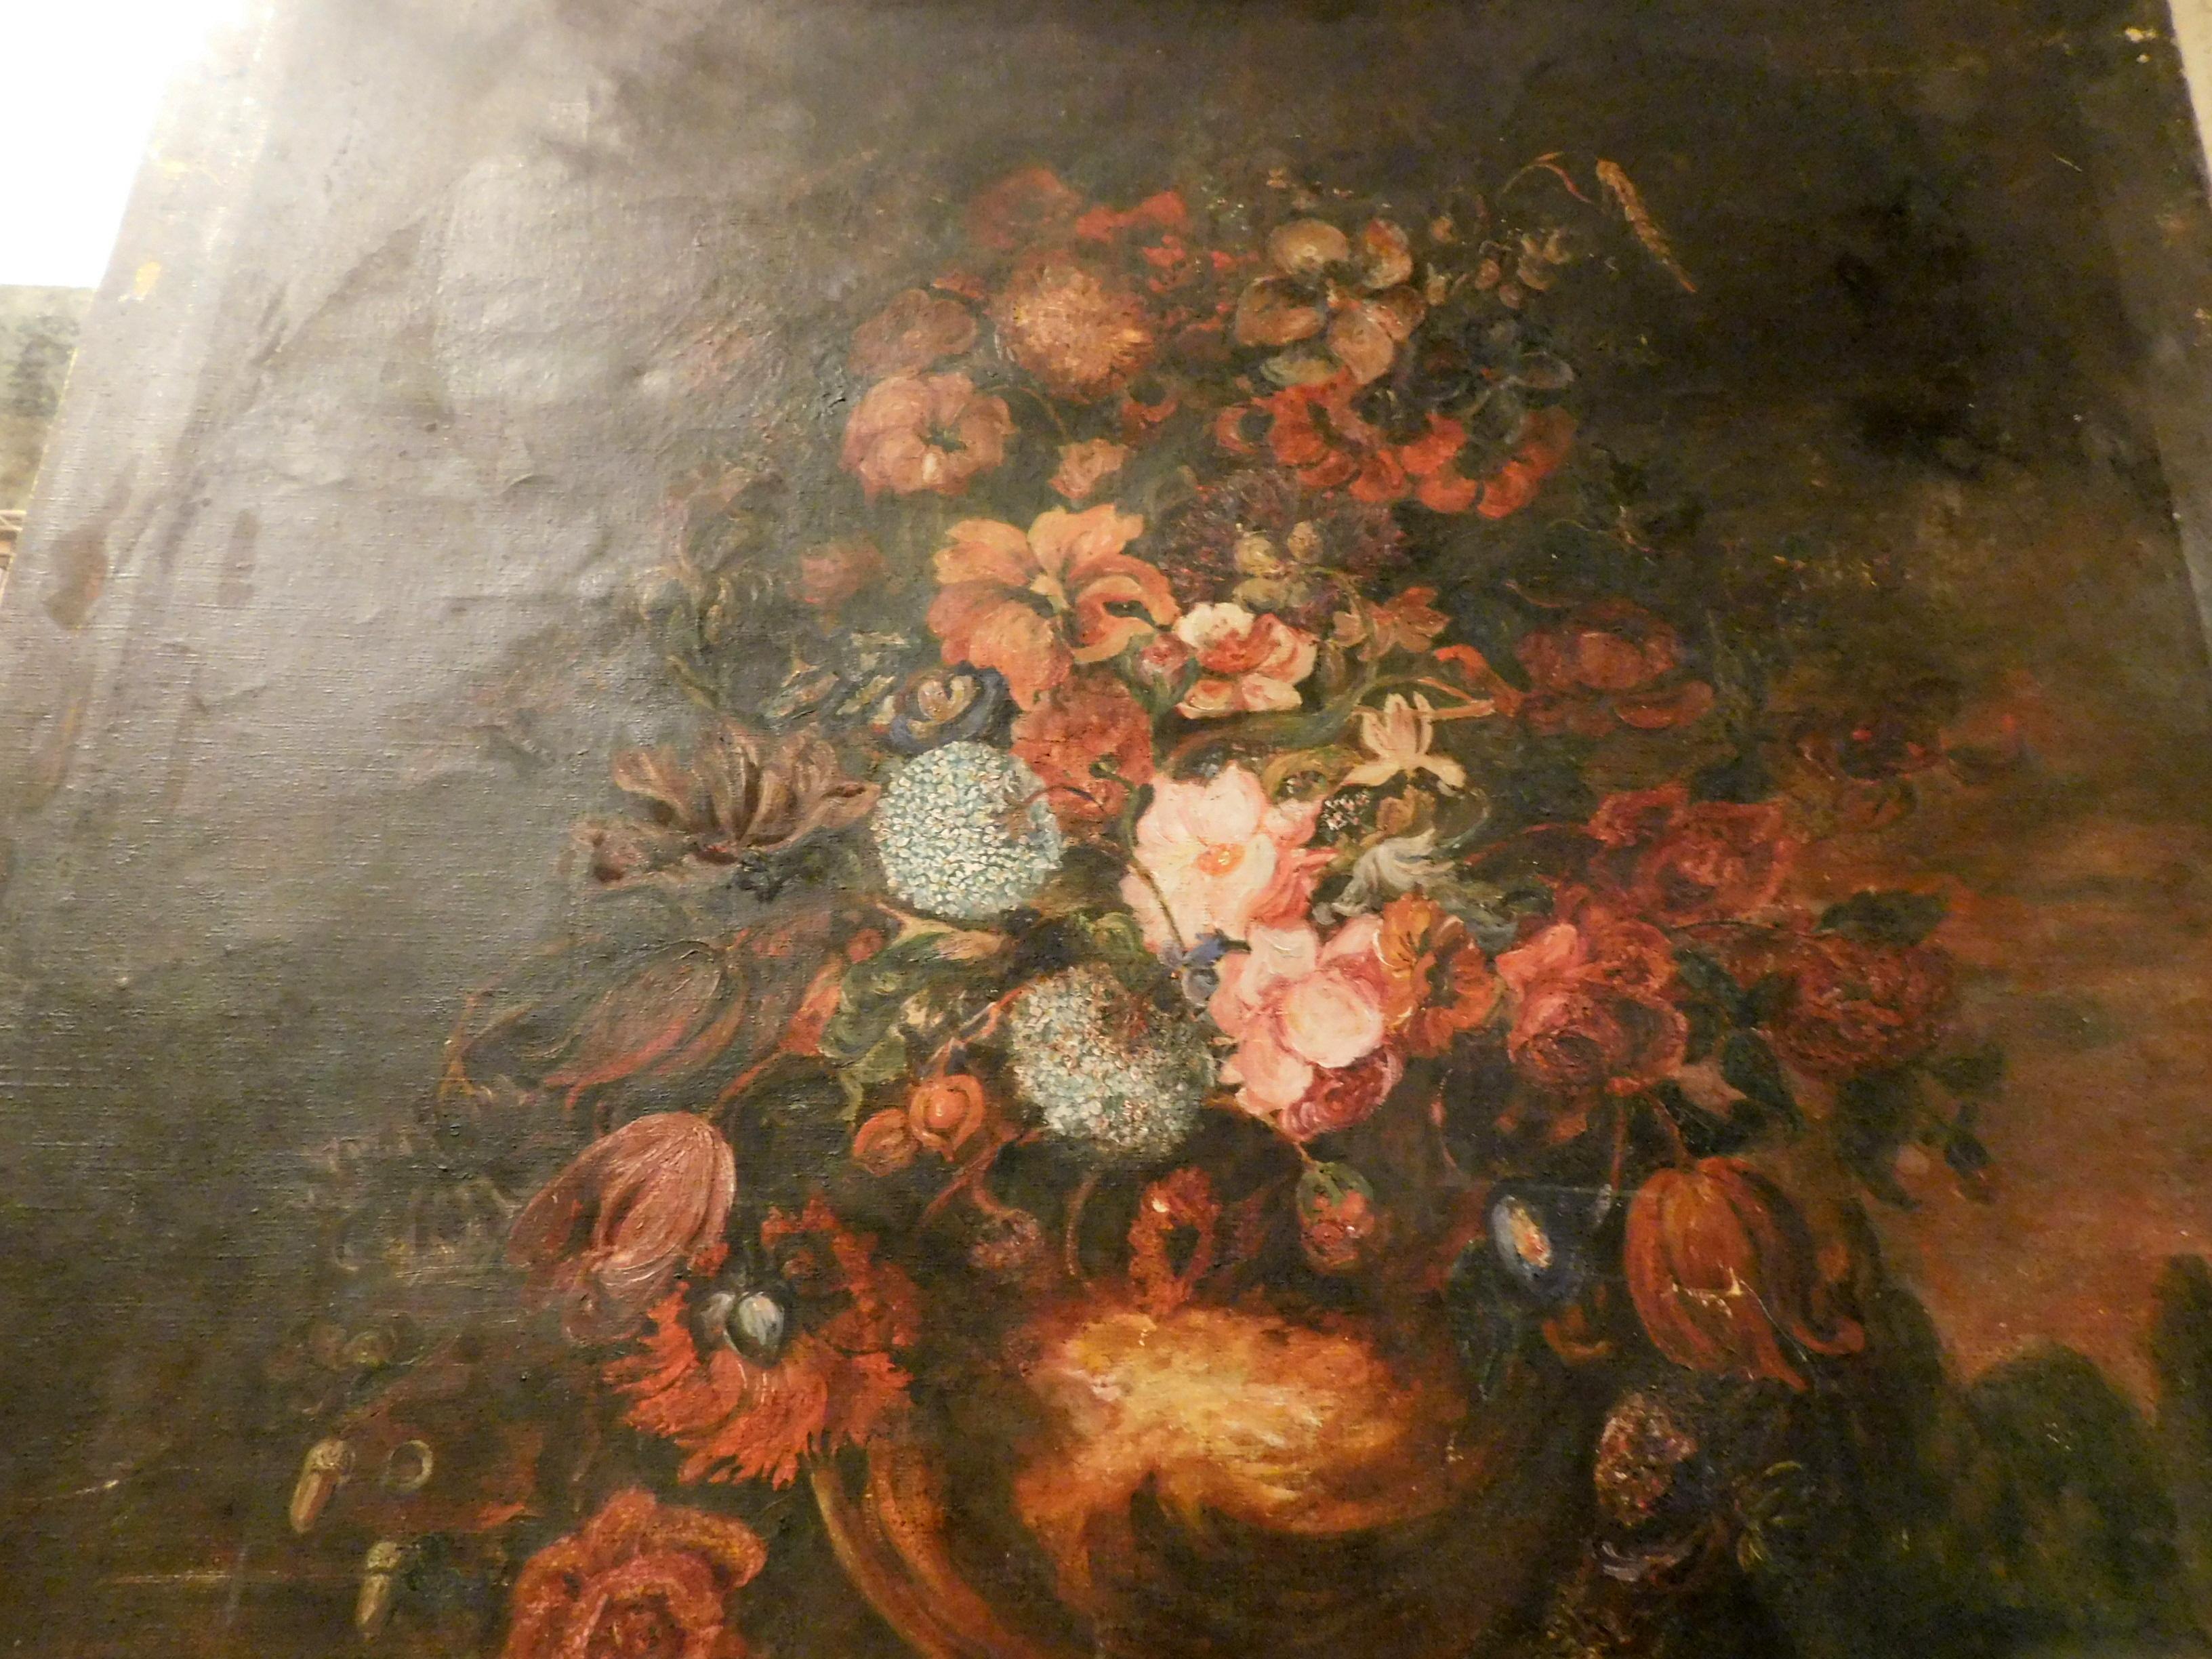 Hand-Painted Antique Painting on Canvas, Floral on a Black Background, 1800 Italy